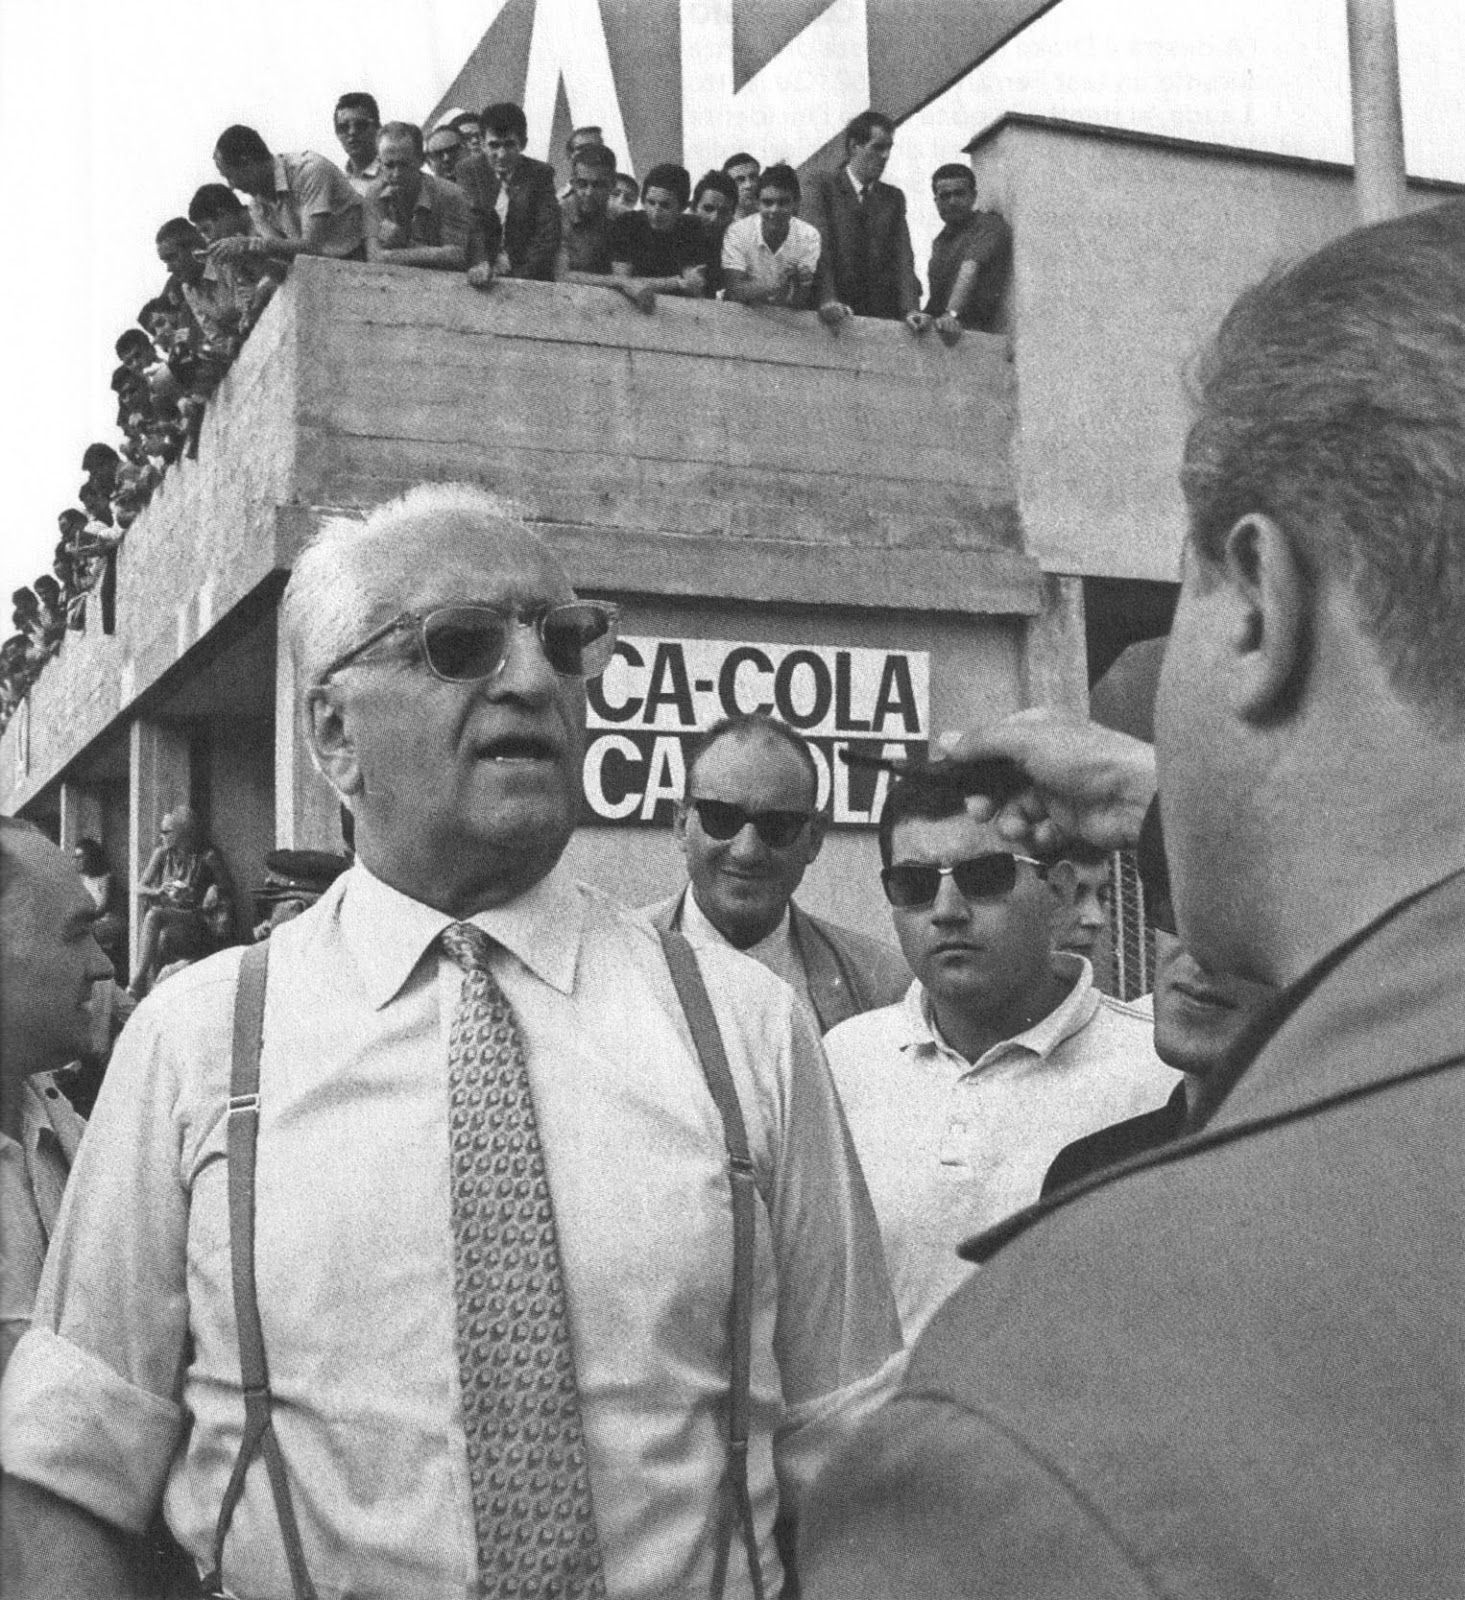 Enzo Ferrari, his son Dino died at the age of 24